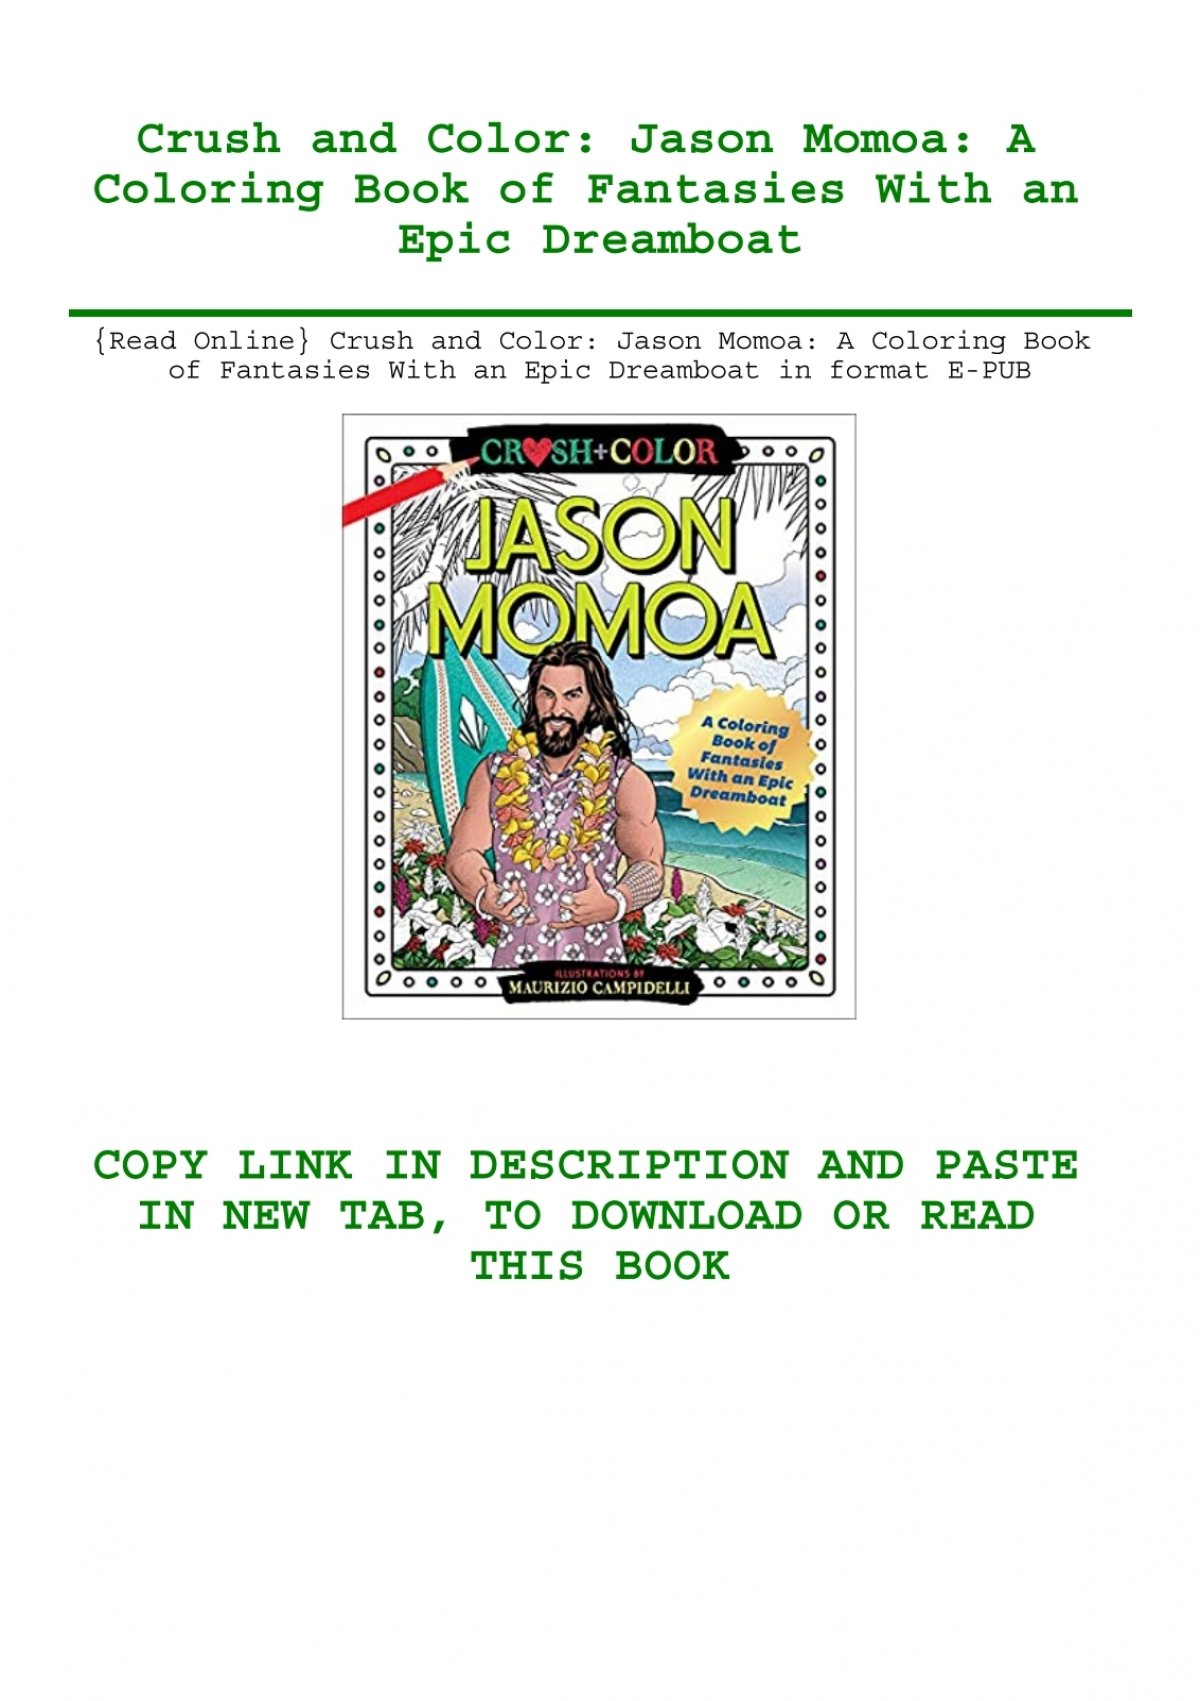 Download Read Online Crush And Color Jason Momoa A Coloring Book Of Fantasies With An Epic Dreamboat In Format E Pub